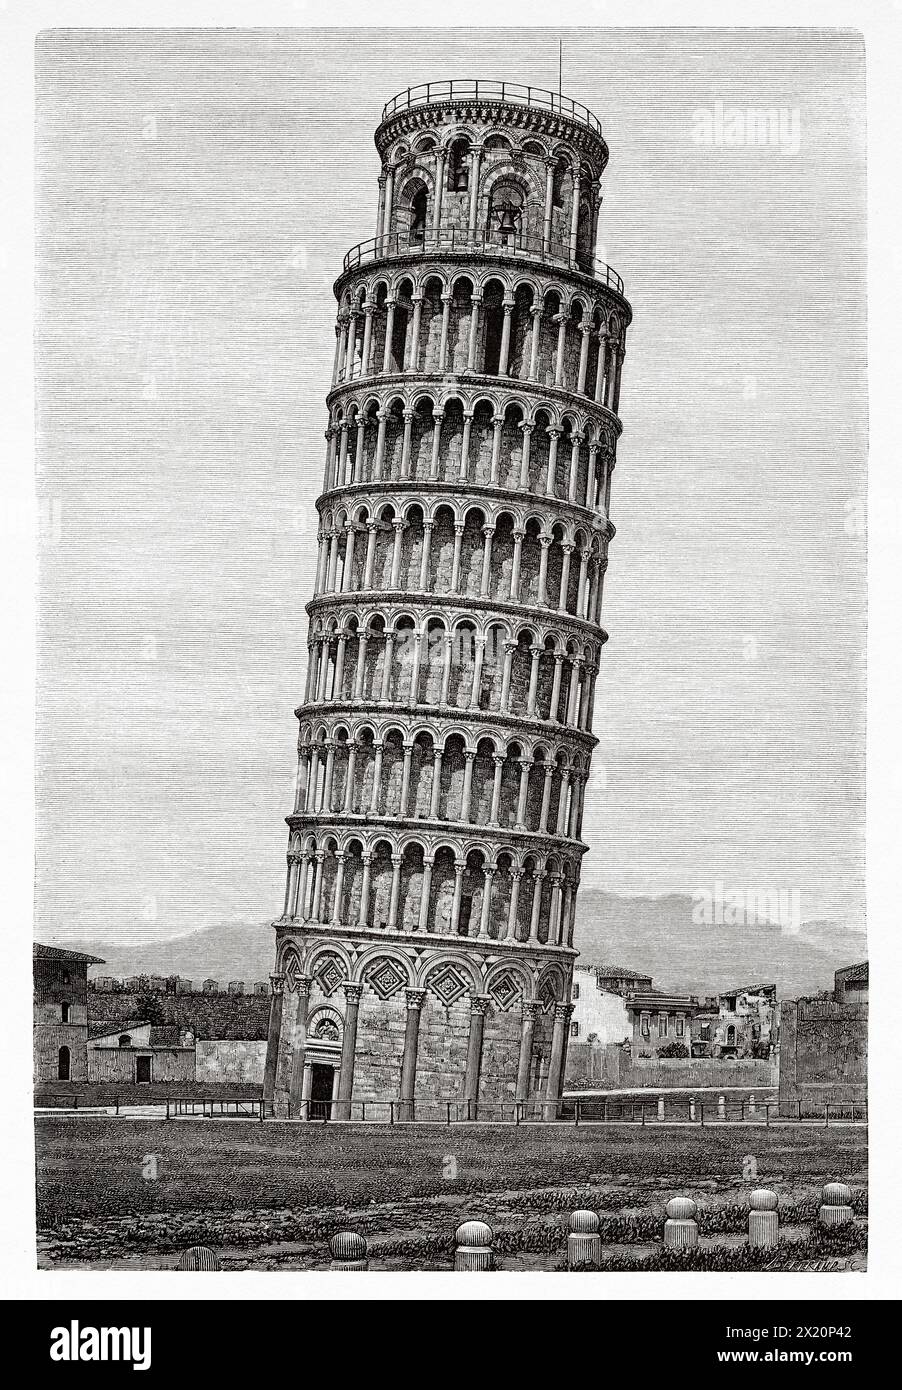 Leaning Tower of Pisa is the bell tower of Pisa Cathedral, located in Piazza del Duomo, Pisa. Tuscany, Italy. Europe. Drawing by Albert Bertrand (1854 - 1912) Travel through Tuscany 1881 by Eugene Muntz (1845 - 1902) Le Tour du Monde 1886 Stock Photo